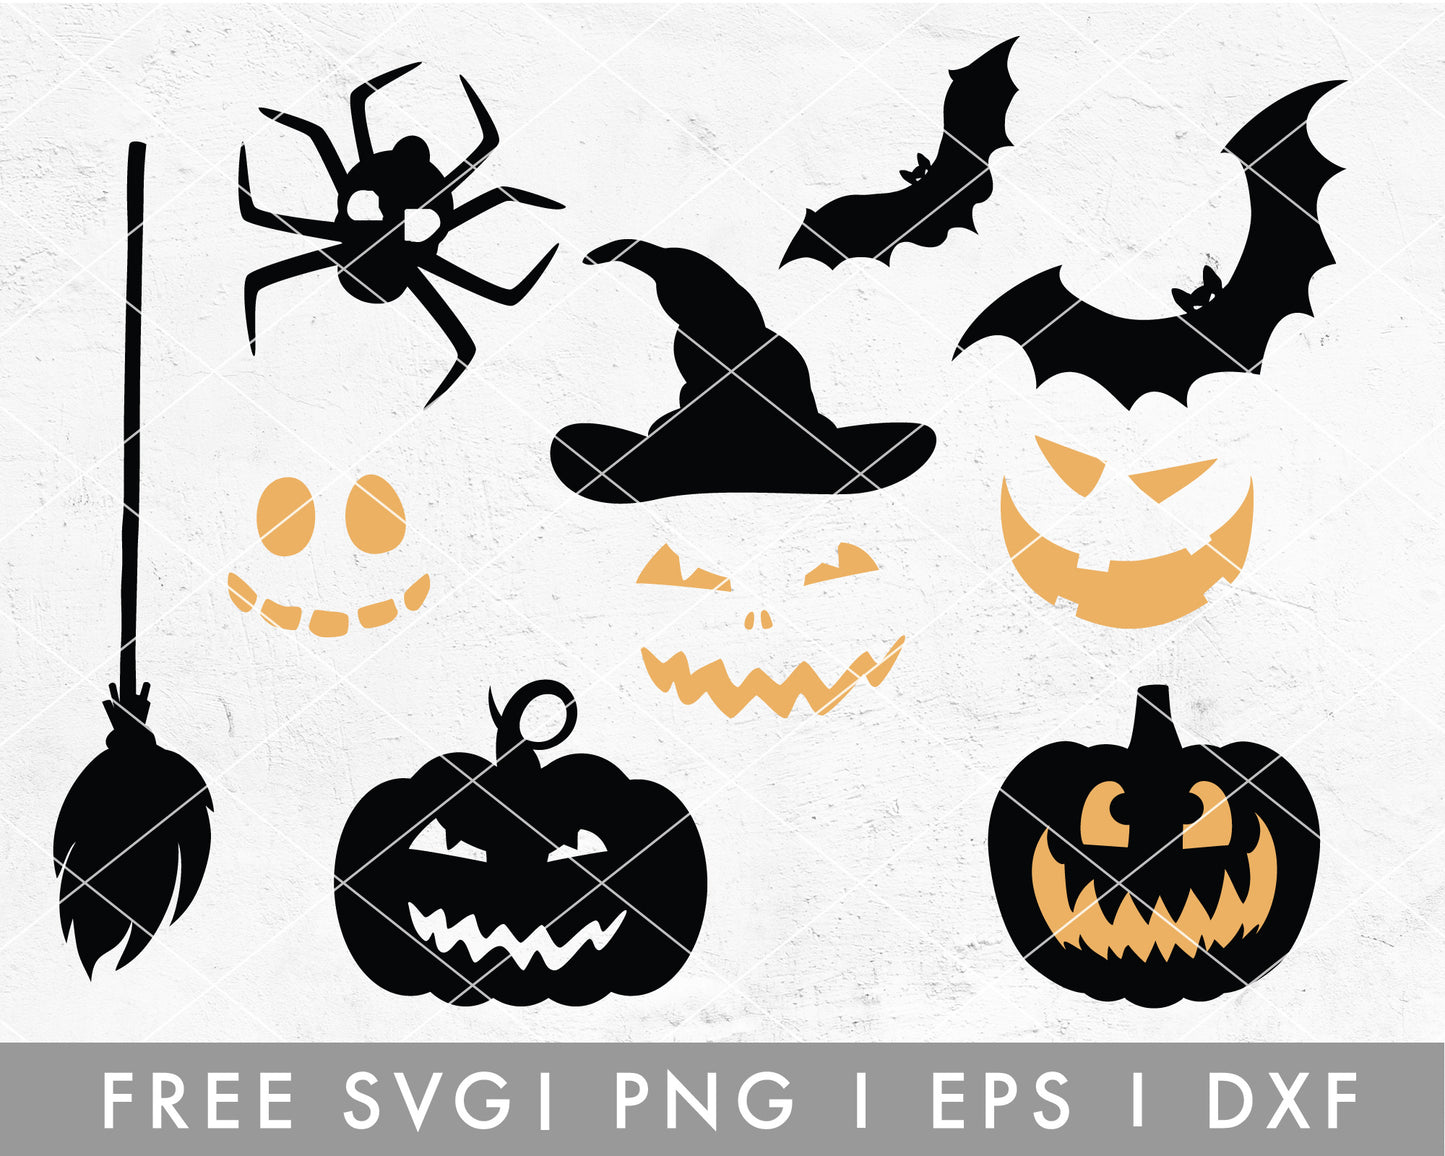 FREE Classic Halloween Elements SVG Cut File for Cricut, Cameo Silhouette 